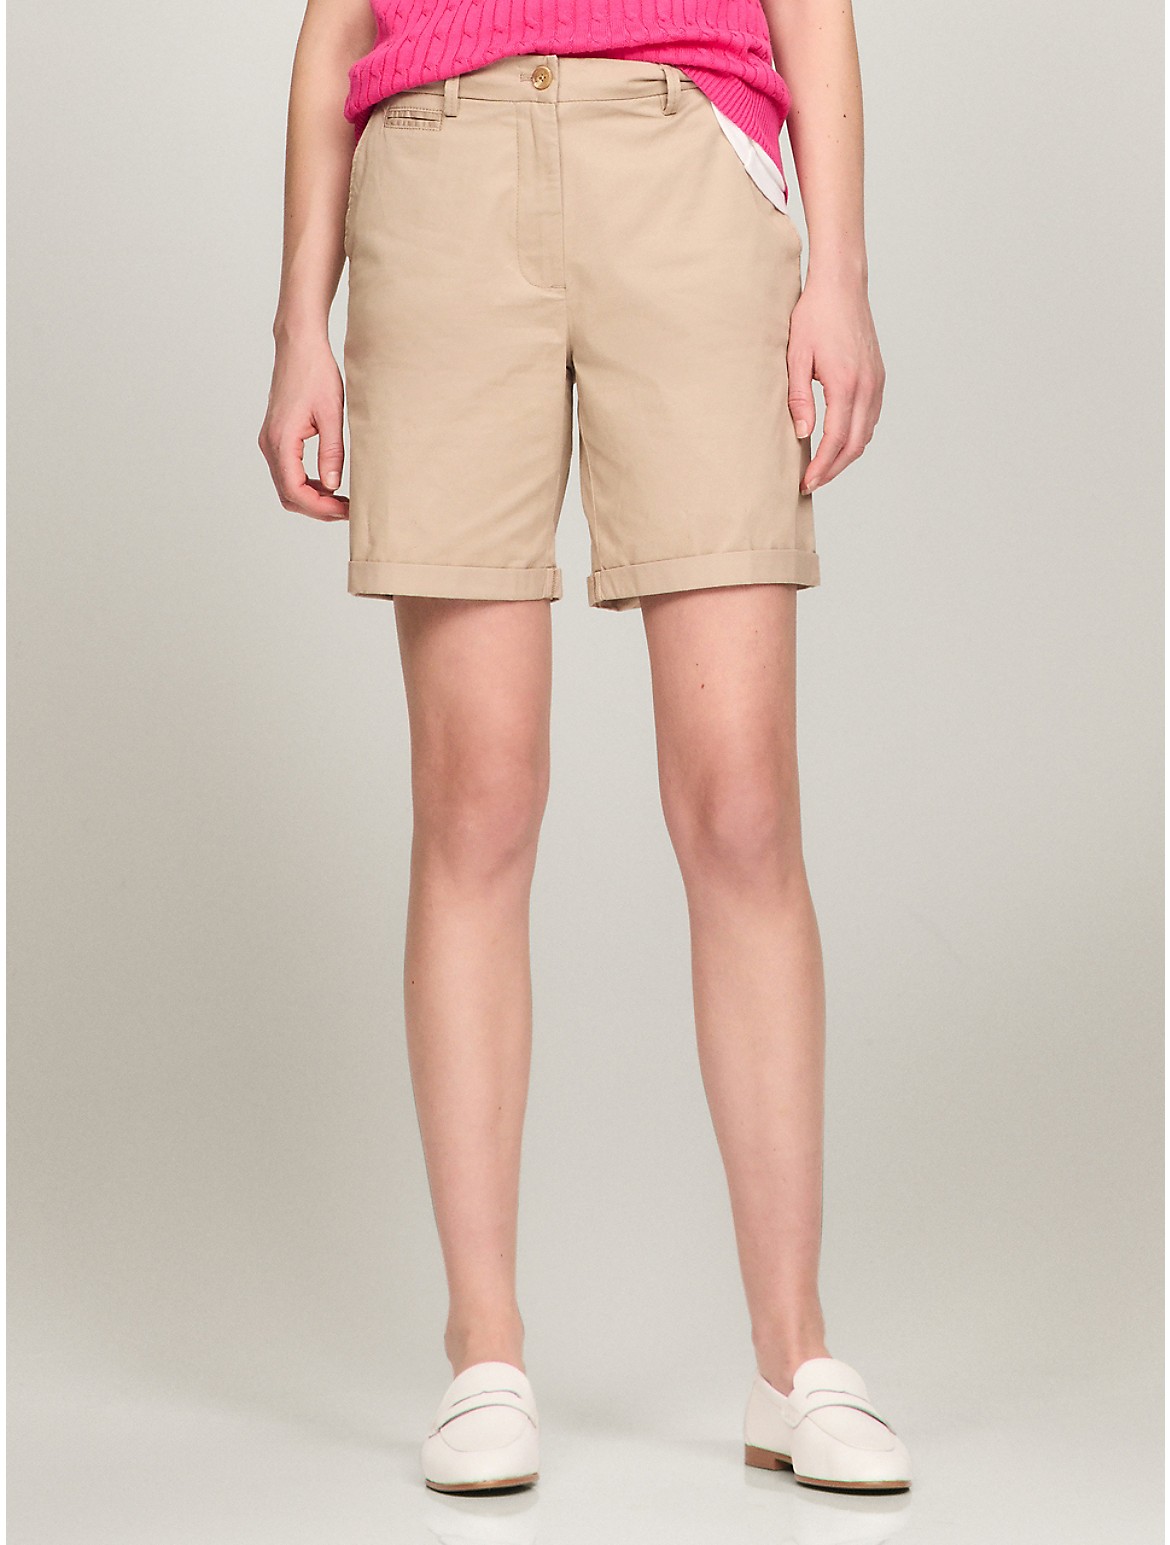 Tommy Hilfiger Women's Solid Stretch Cotton 7 Chino Short